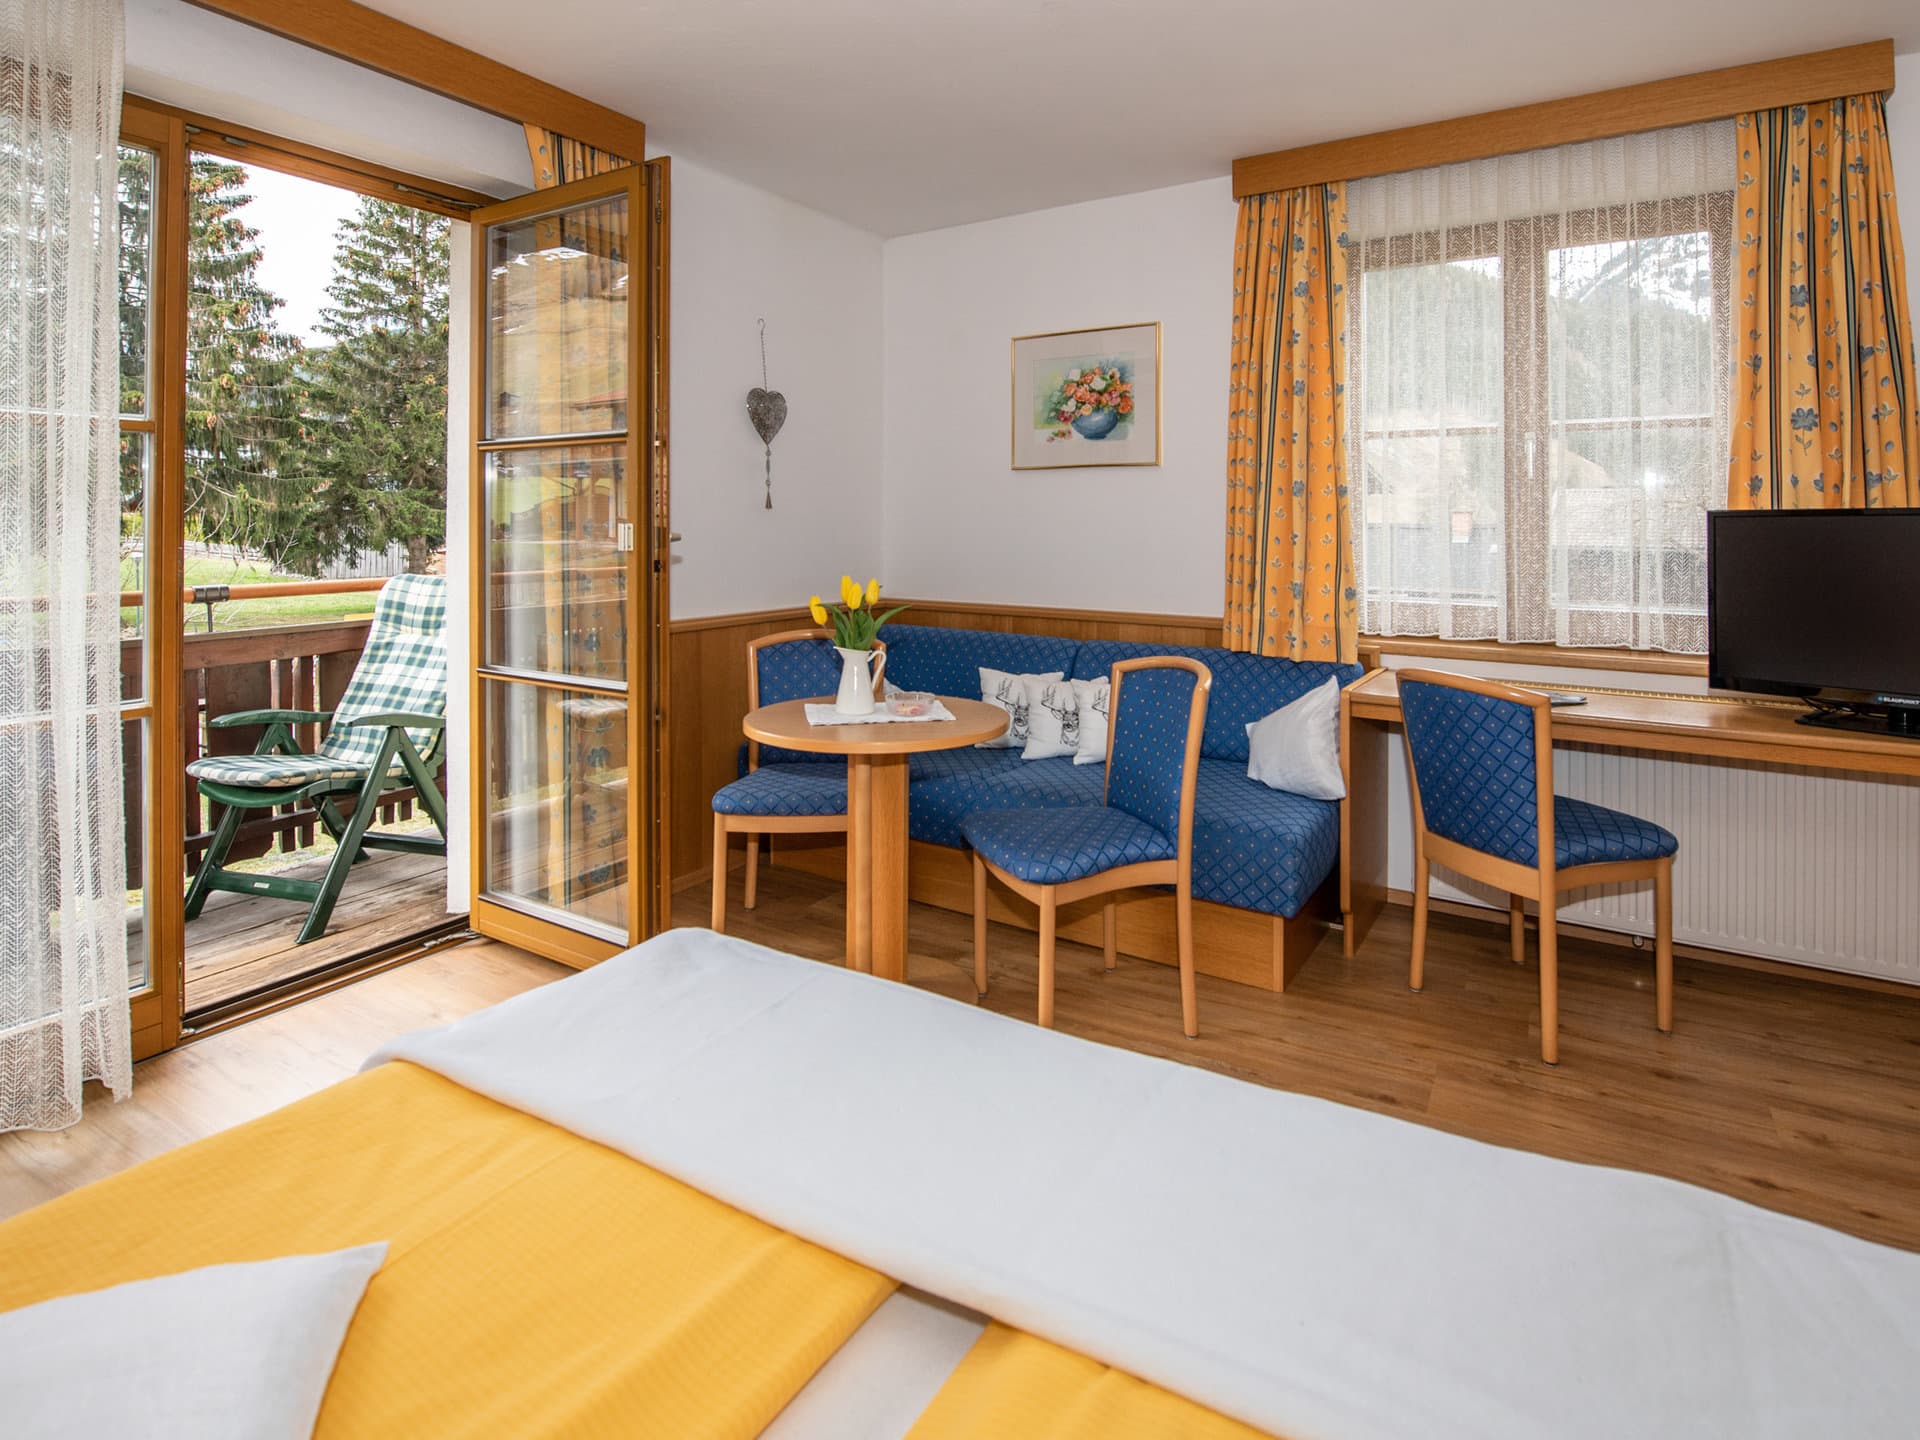 Pension Moser-Meiling - Appartements & Zimmer in Rauris